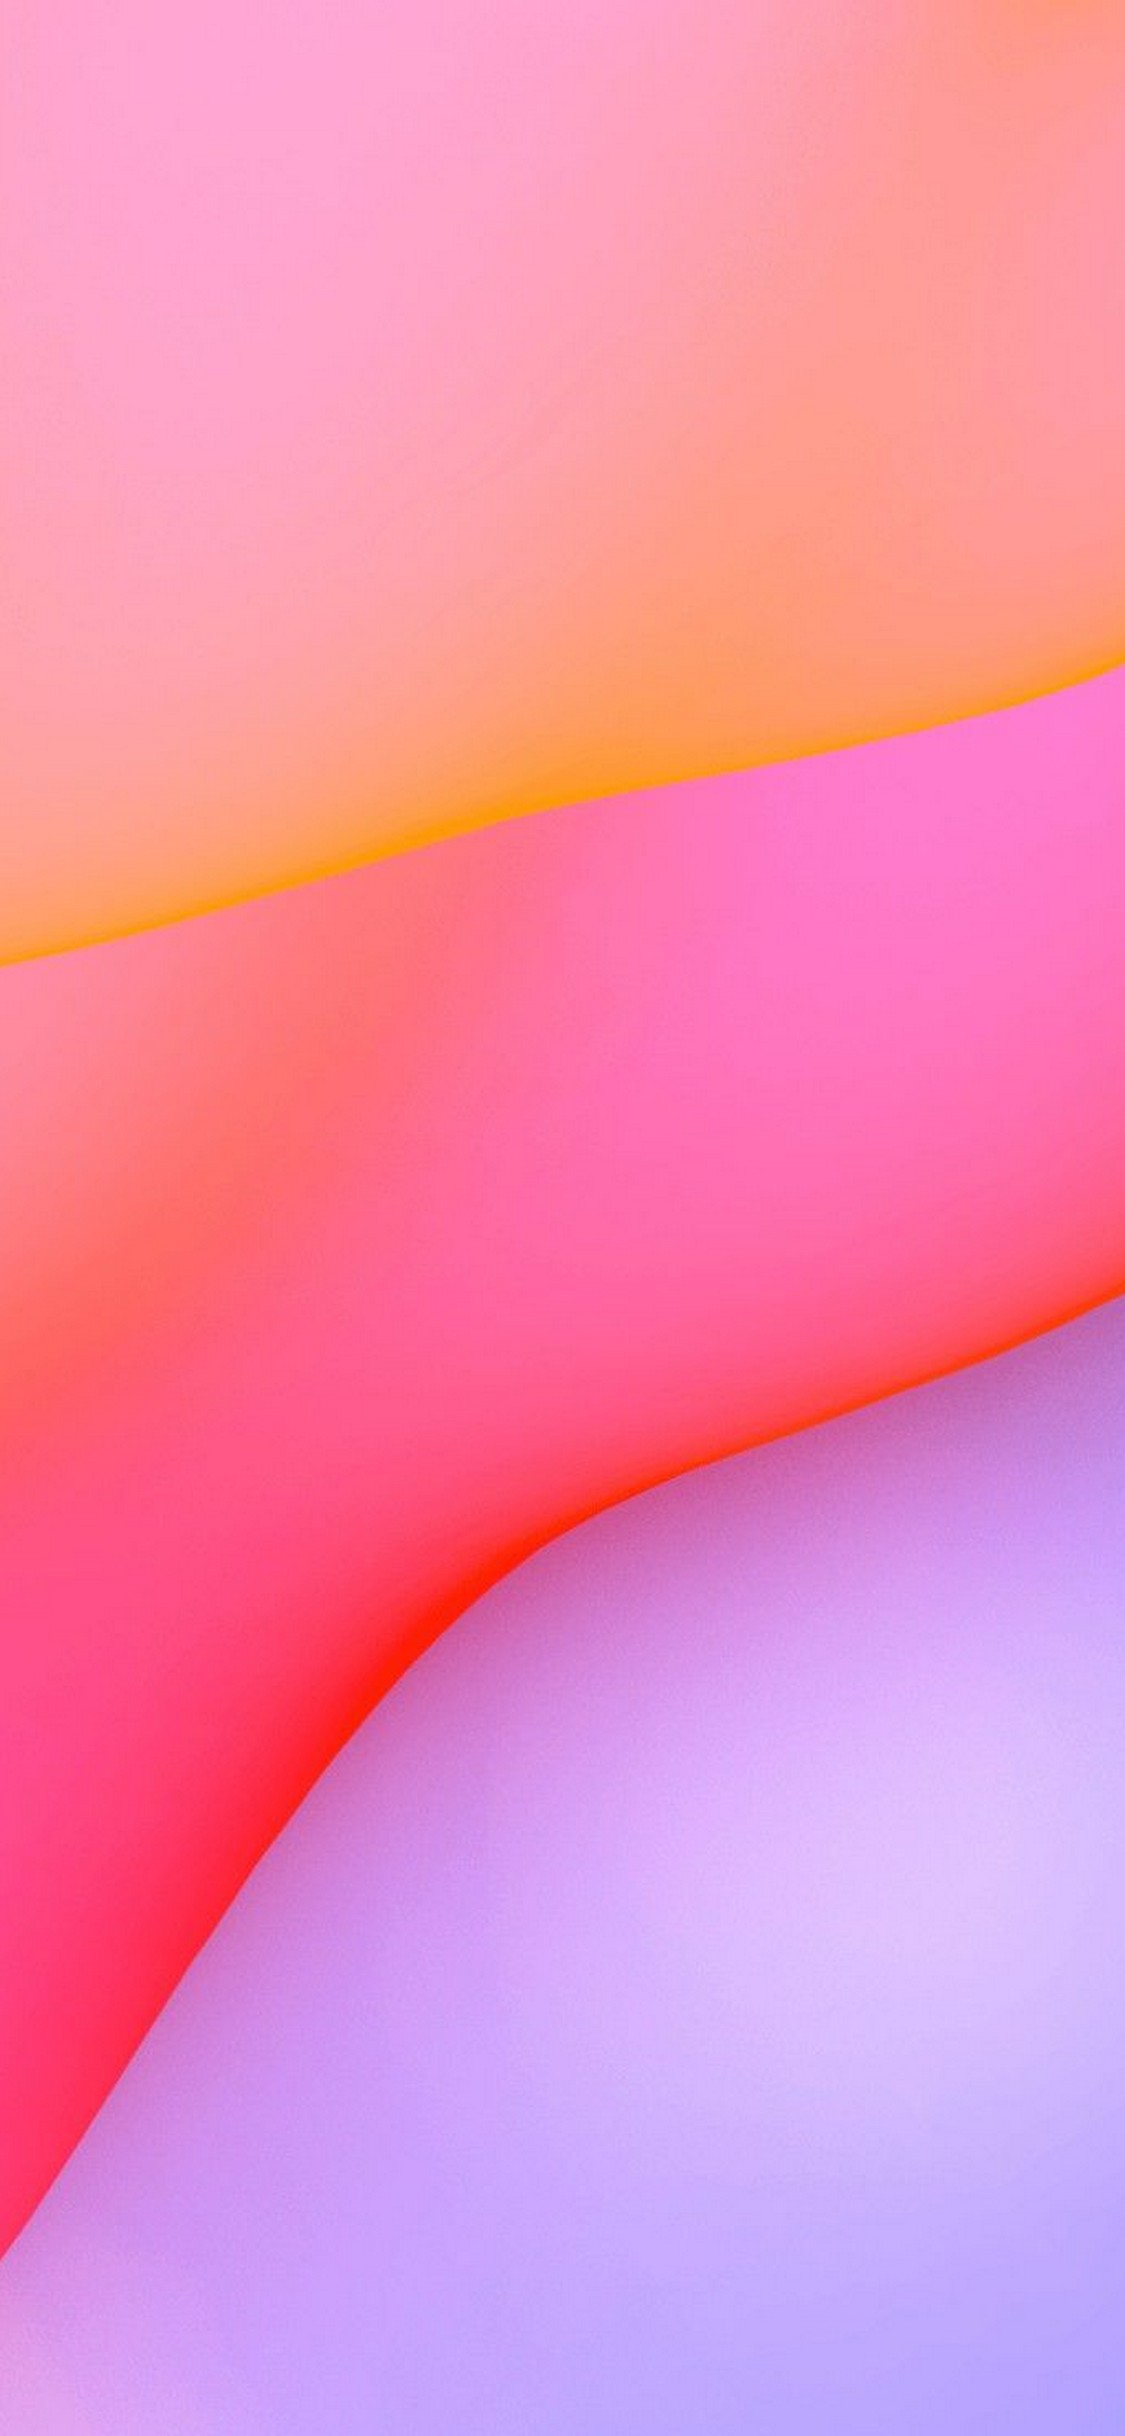 Apple Iphone X Wallpaper With High-resolution Pixel - Pink Iphone X  Background - 1125x2436 Wallpaper 